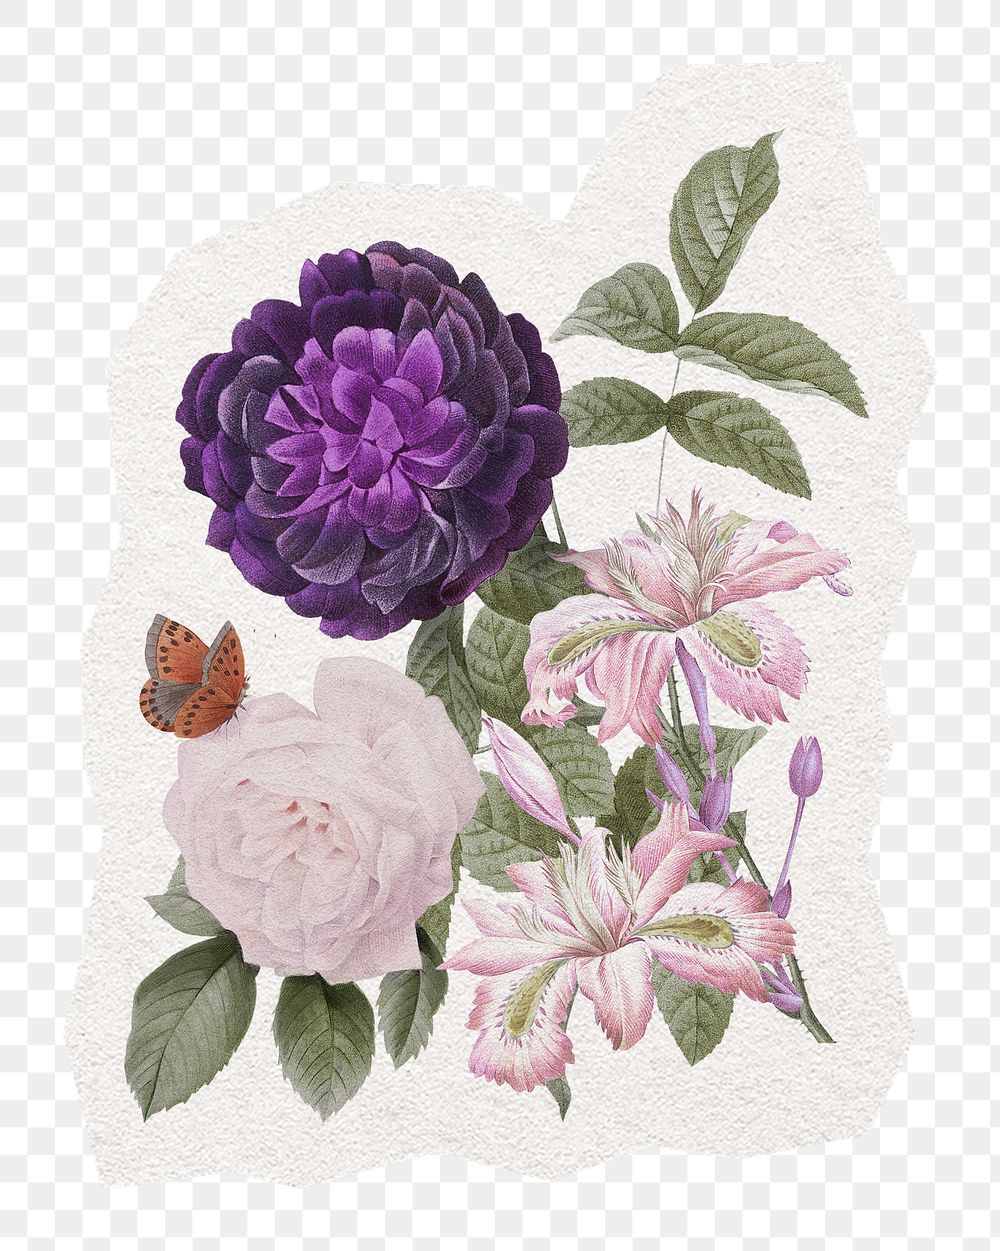 Pretty png flower sticker, purple watercolor illustration in transparent background